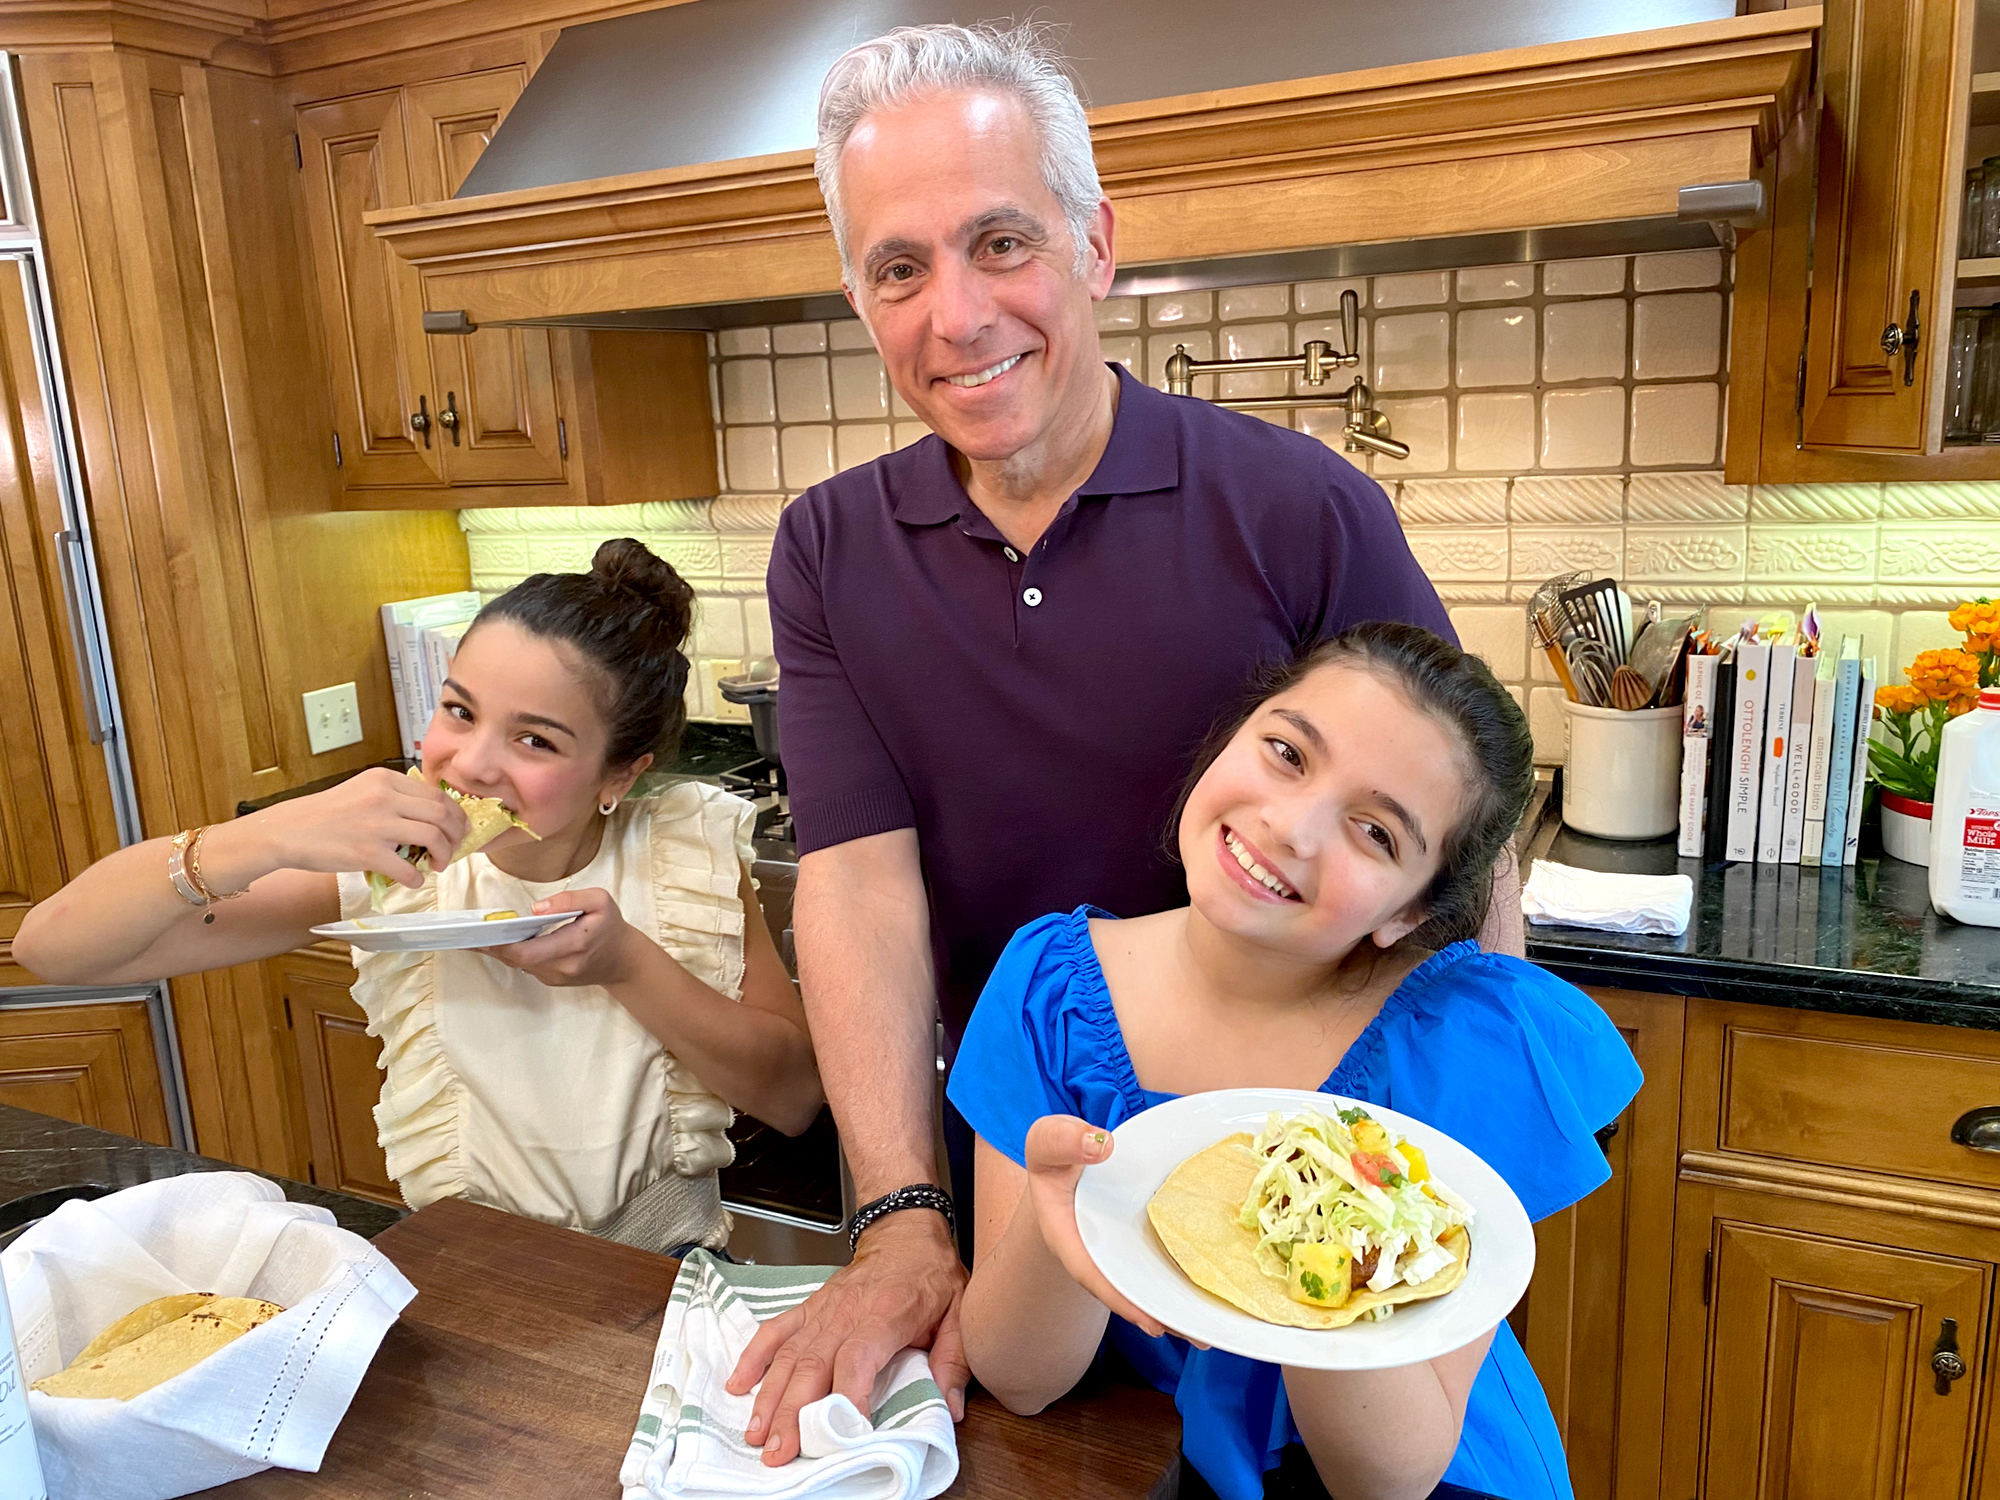 Dinner Is Served: Geoffrey Zakarian Shares A Page From His New